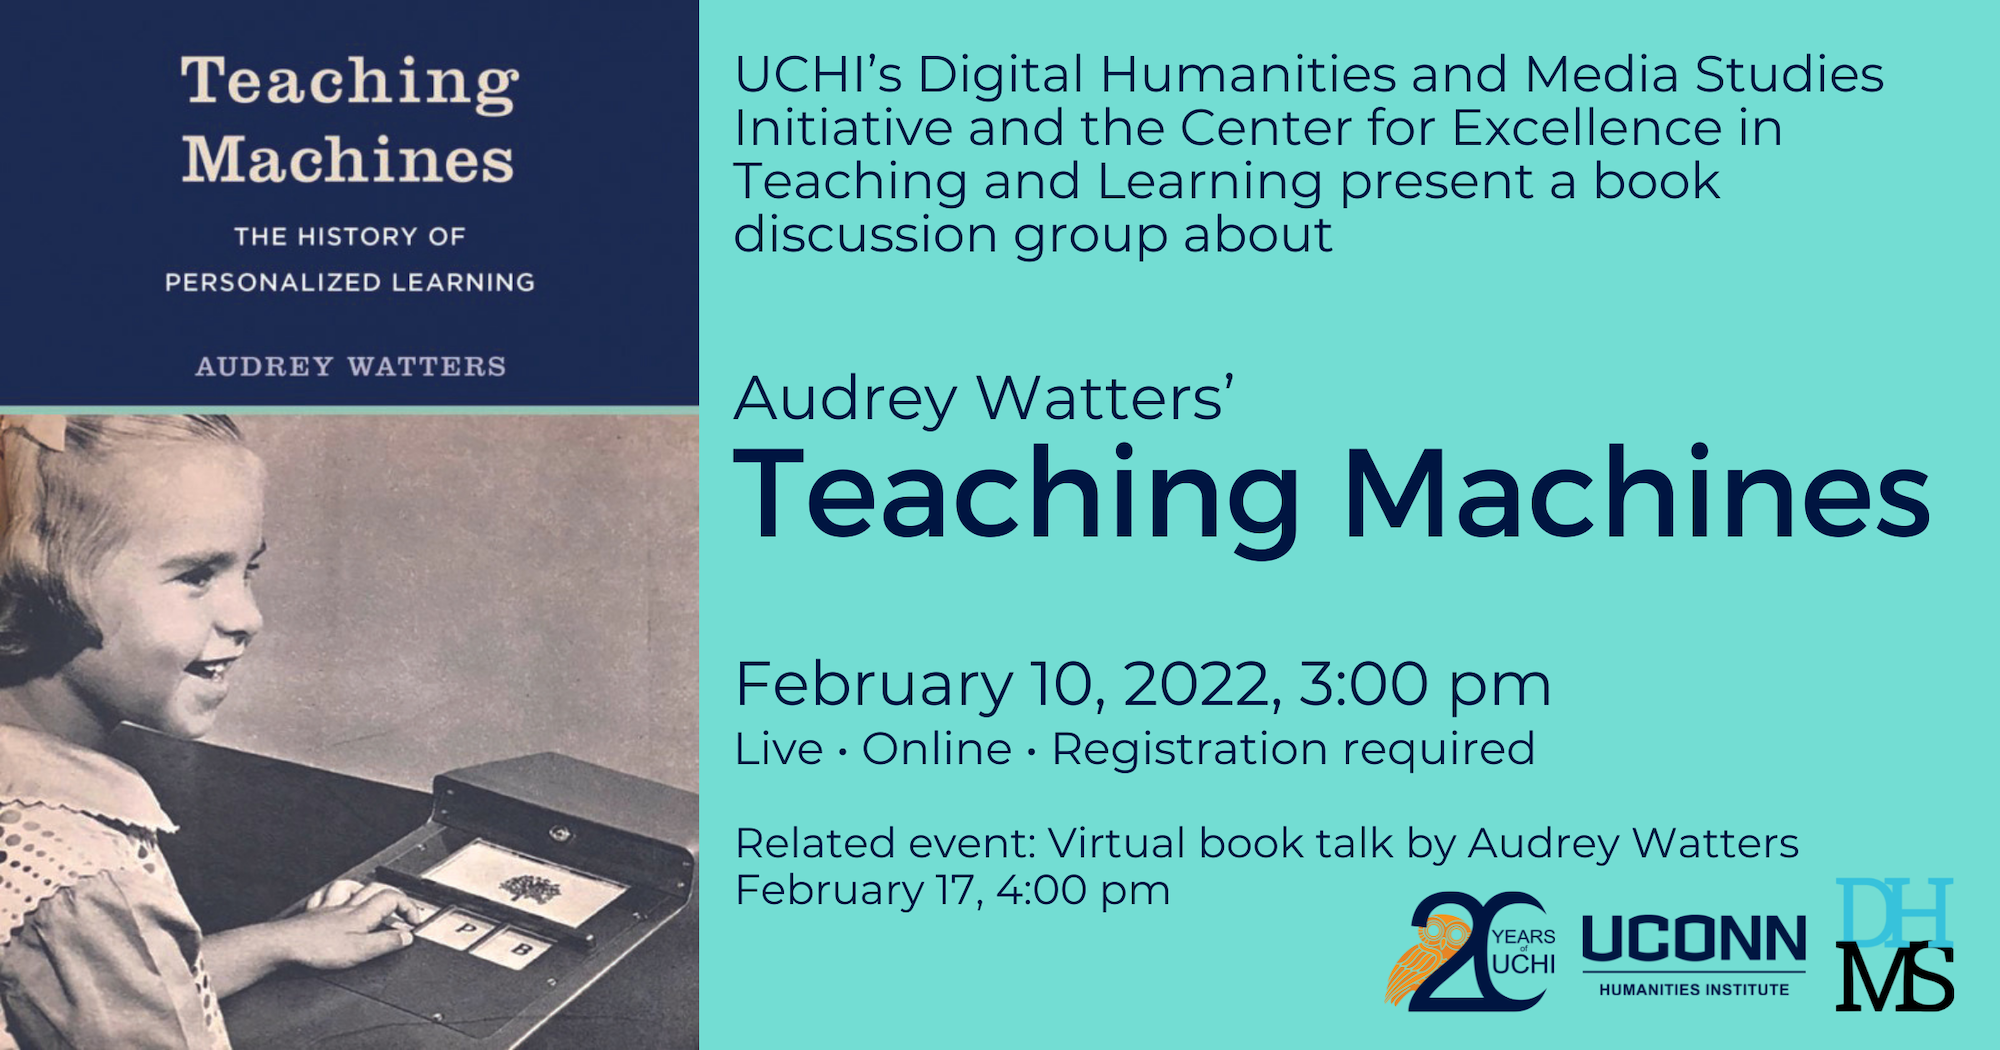 A poster advertising a book discussion about Audrey Watters' Teaching Machines. A picture of the book cover beside text that reads: UCHI's Digital Humanities and Media Studies Initiative and the Center for Excellence in Teaching and Learning presents a discussion group about Audrey Watters’ Teaching Machines. February 10, 2022, 3:00pm. Live. Online. Registration required. Related event: virtual book talk by Audrey Watters, February 17 at 4:00pm.